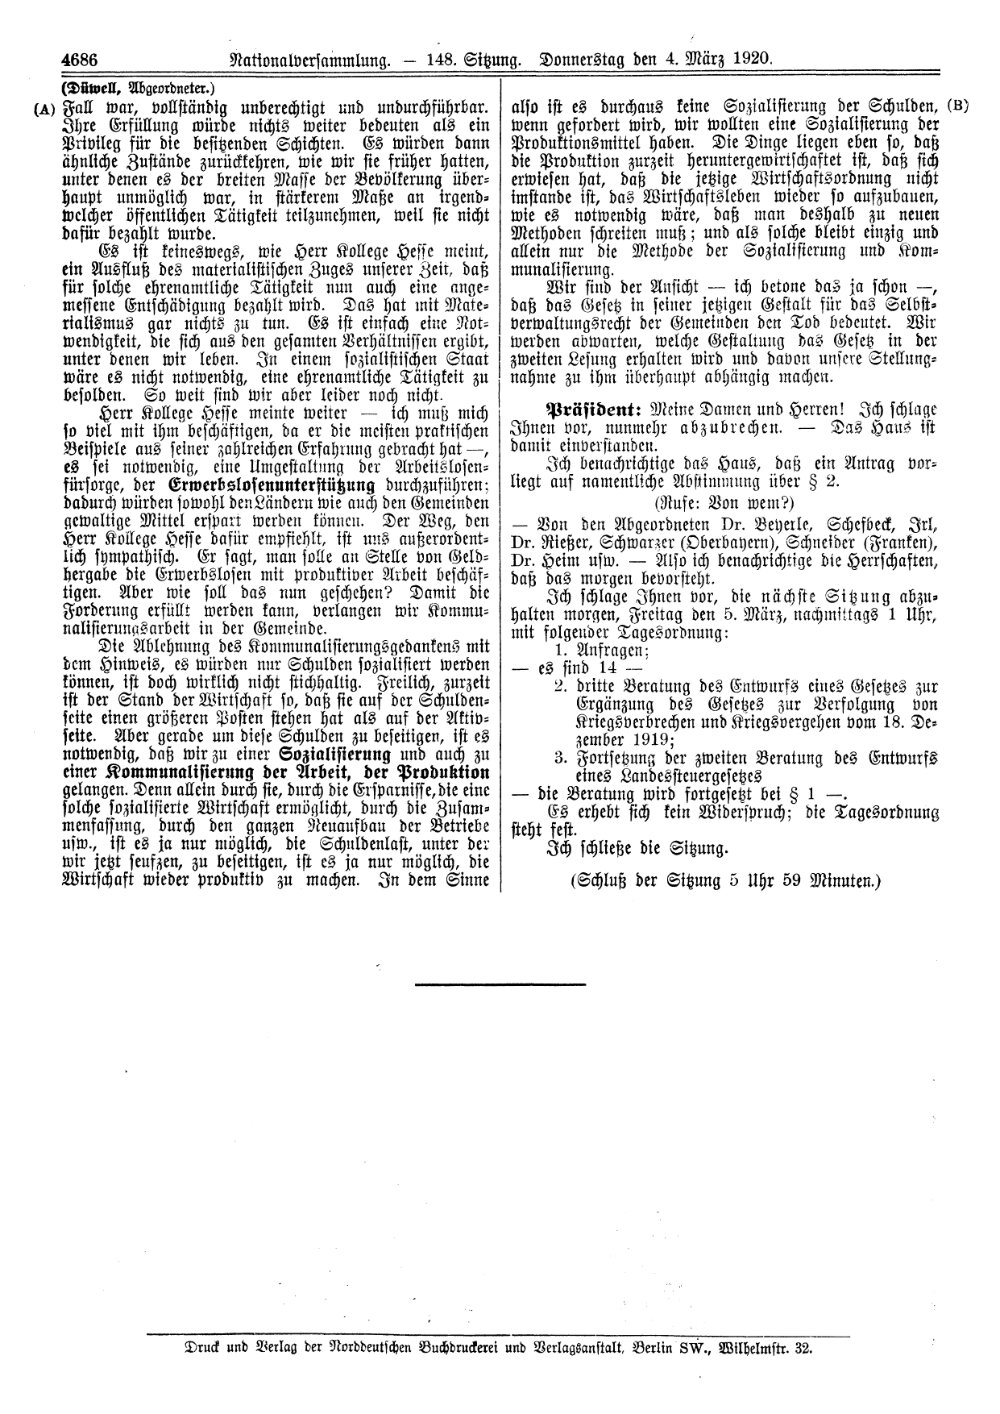 Scan of page 4686